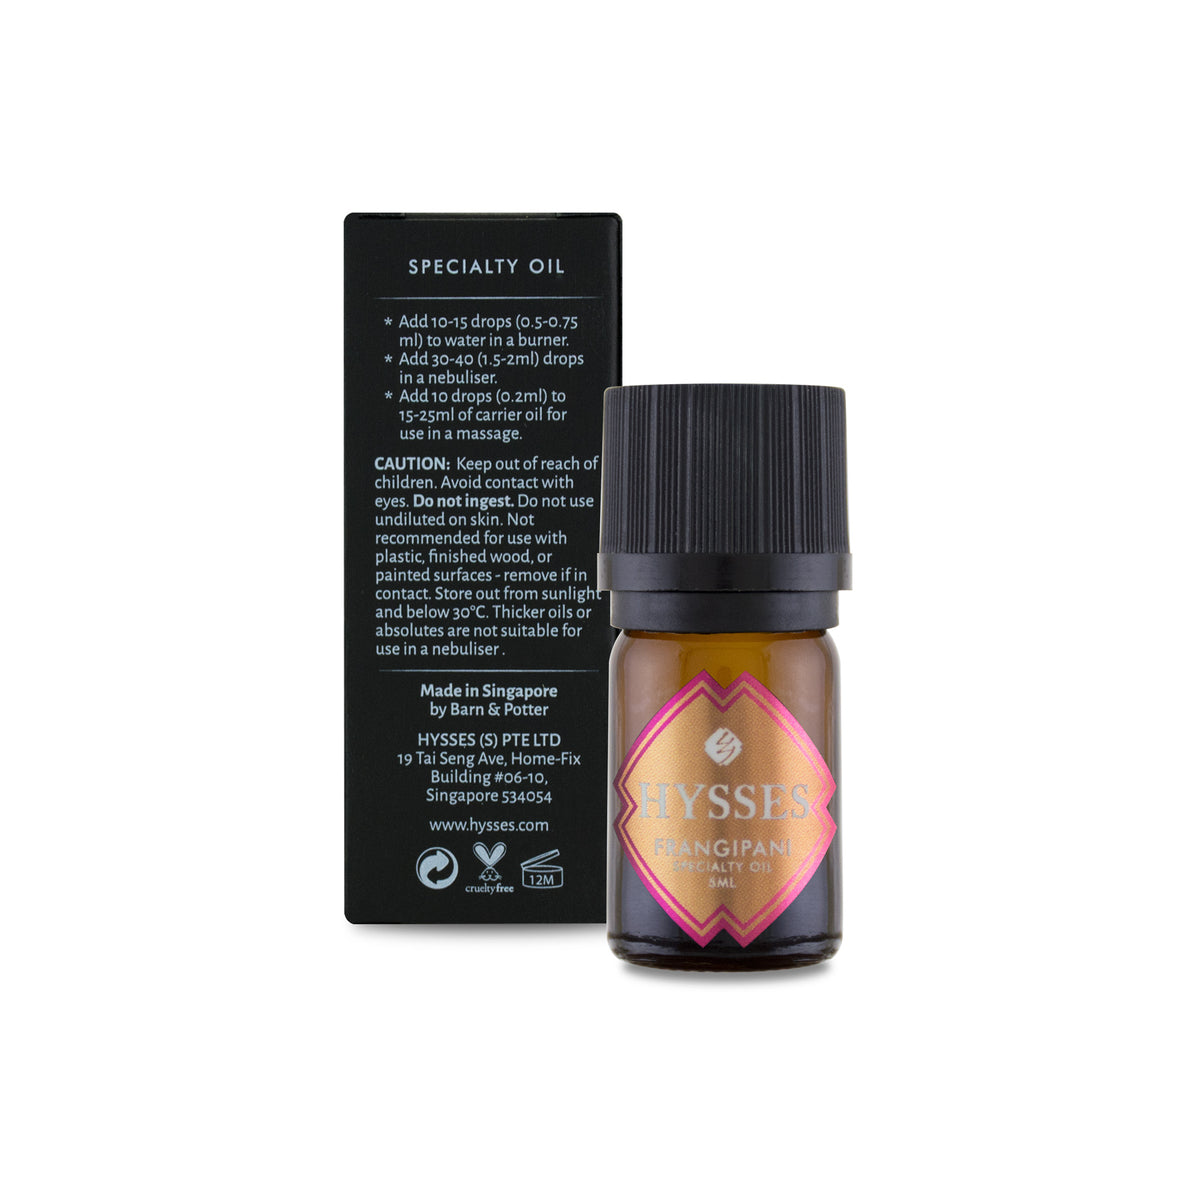 Specialty Oil Frangipani Absolute (25%)